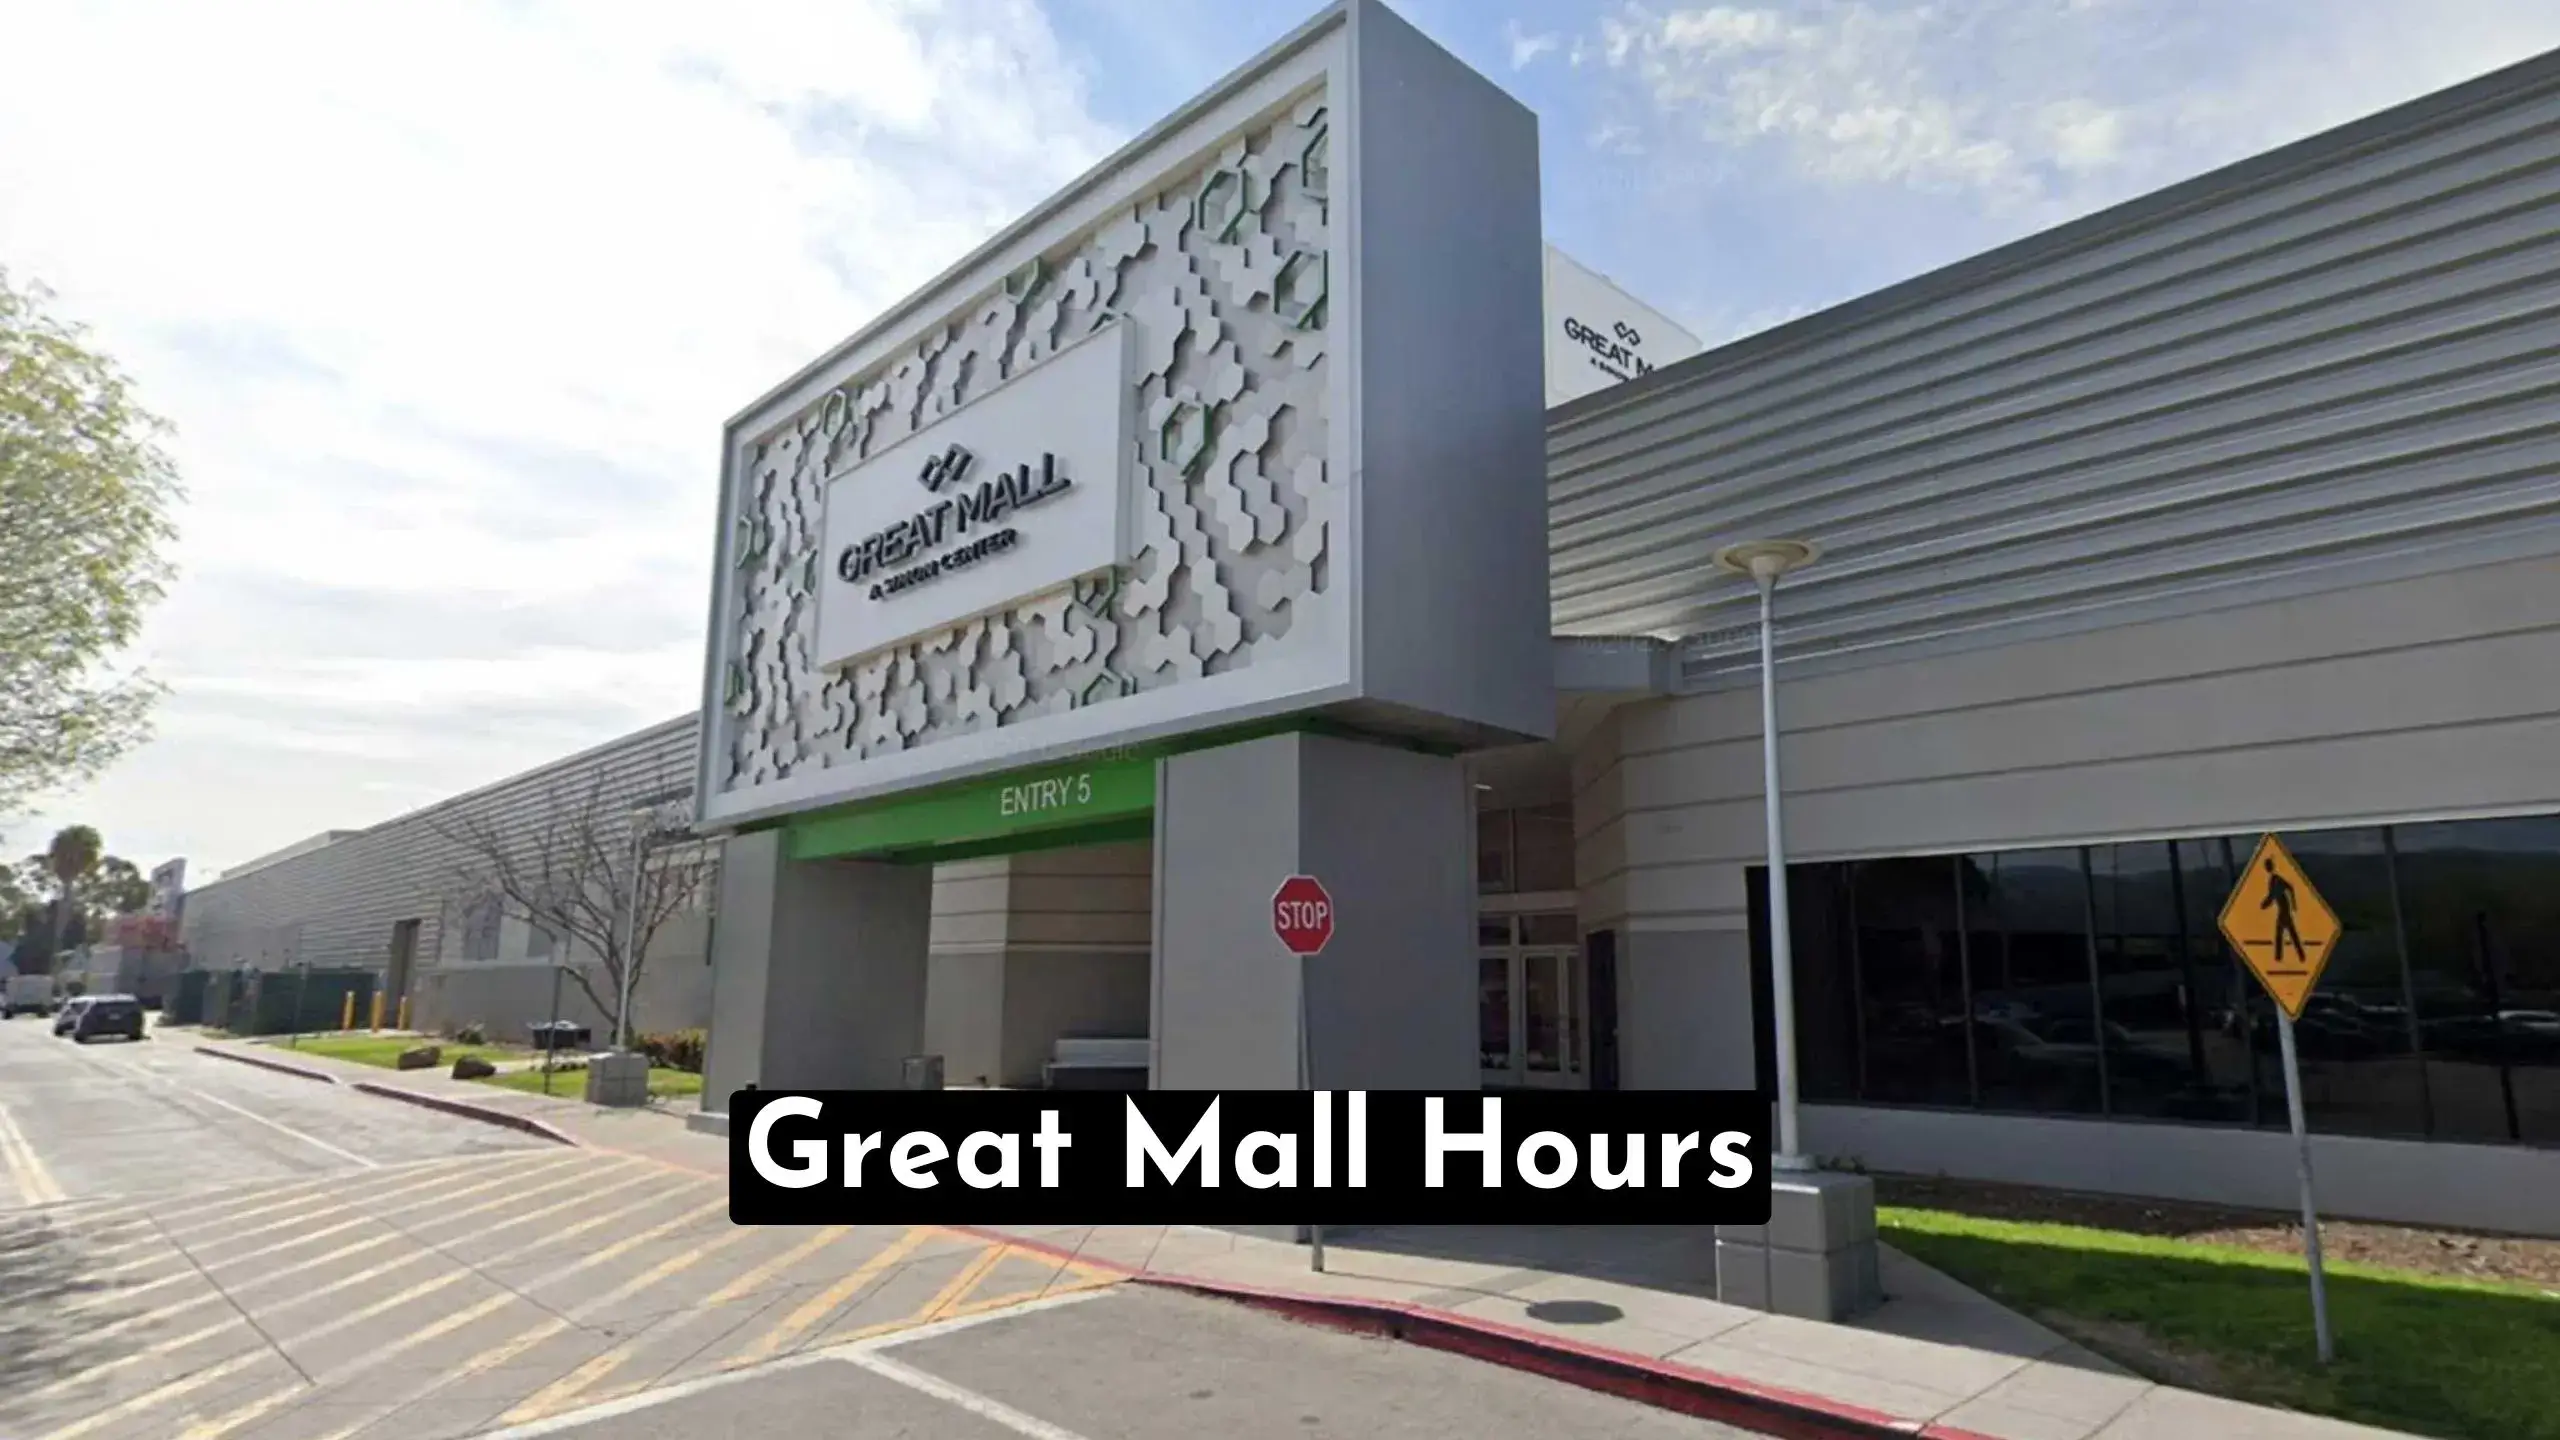 Discover the best shopping times at Great Mall Hours. Extensive store options, convenient amenities & extended hours for your ultimate experience.